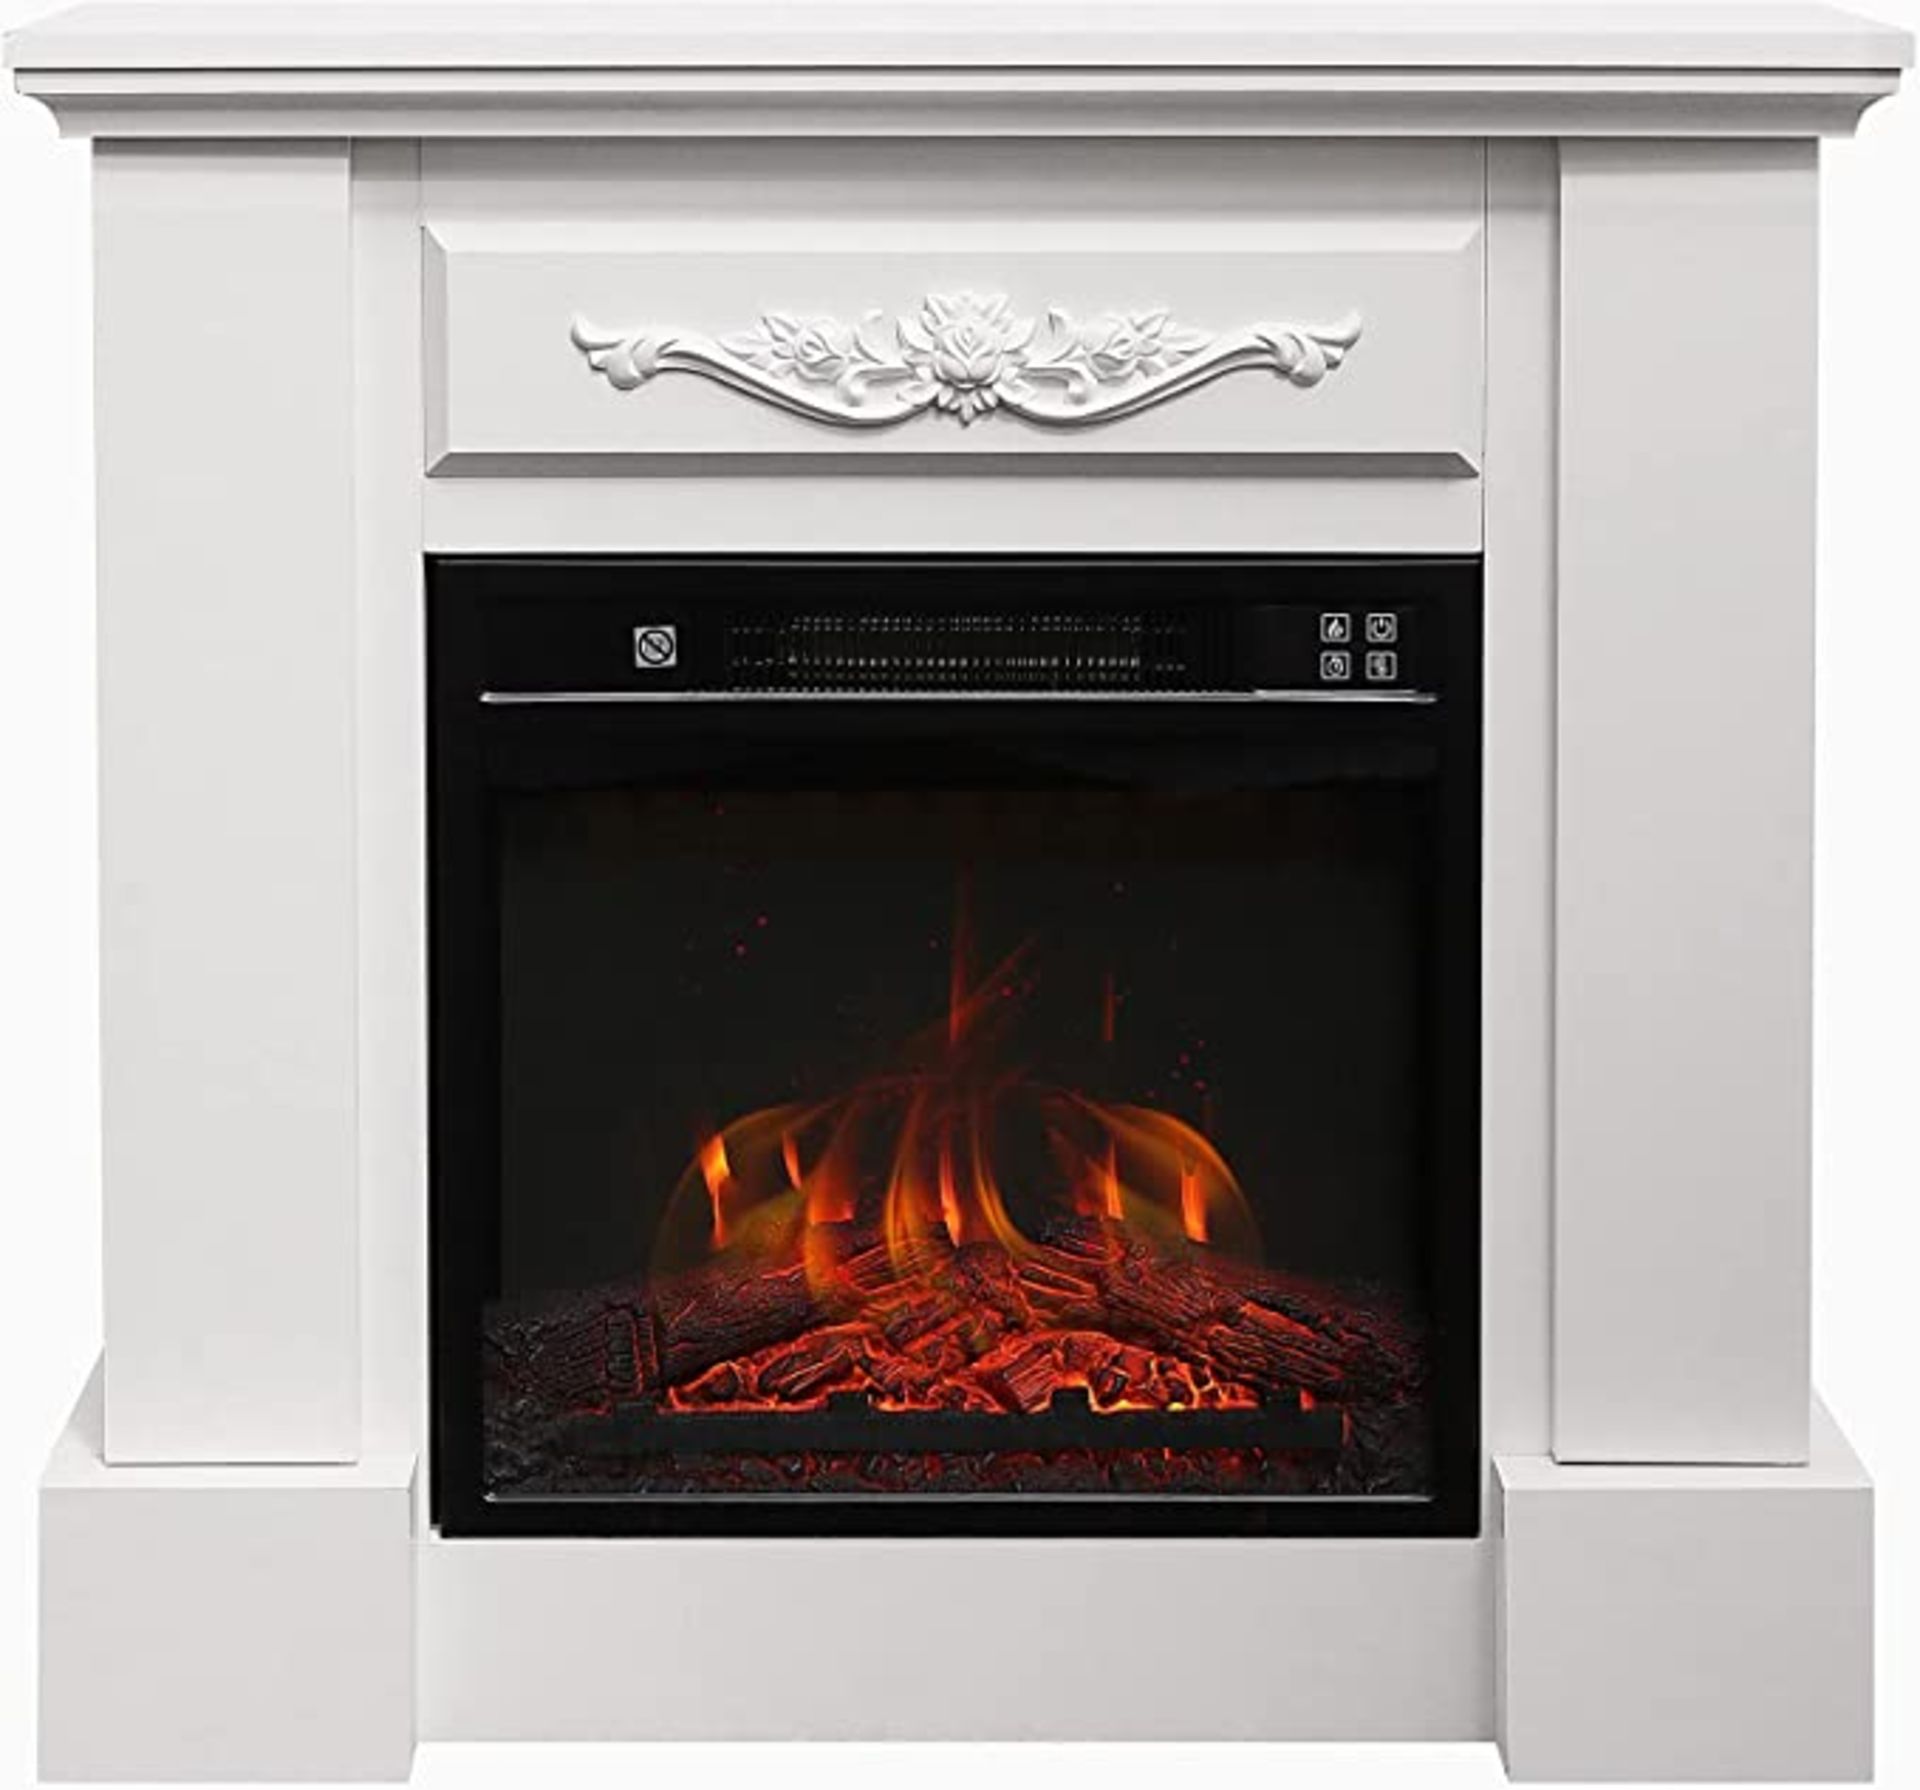 BRAND NEW ELECTRIC FIRE WITH LOG BURNER EFFECT, WITH FIRE SURROUND 17-27 DEGREES THERMOSTAT,